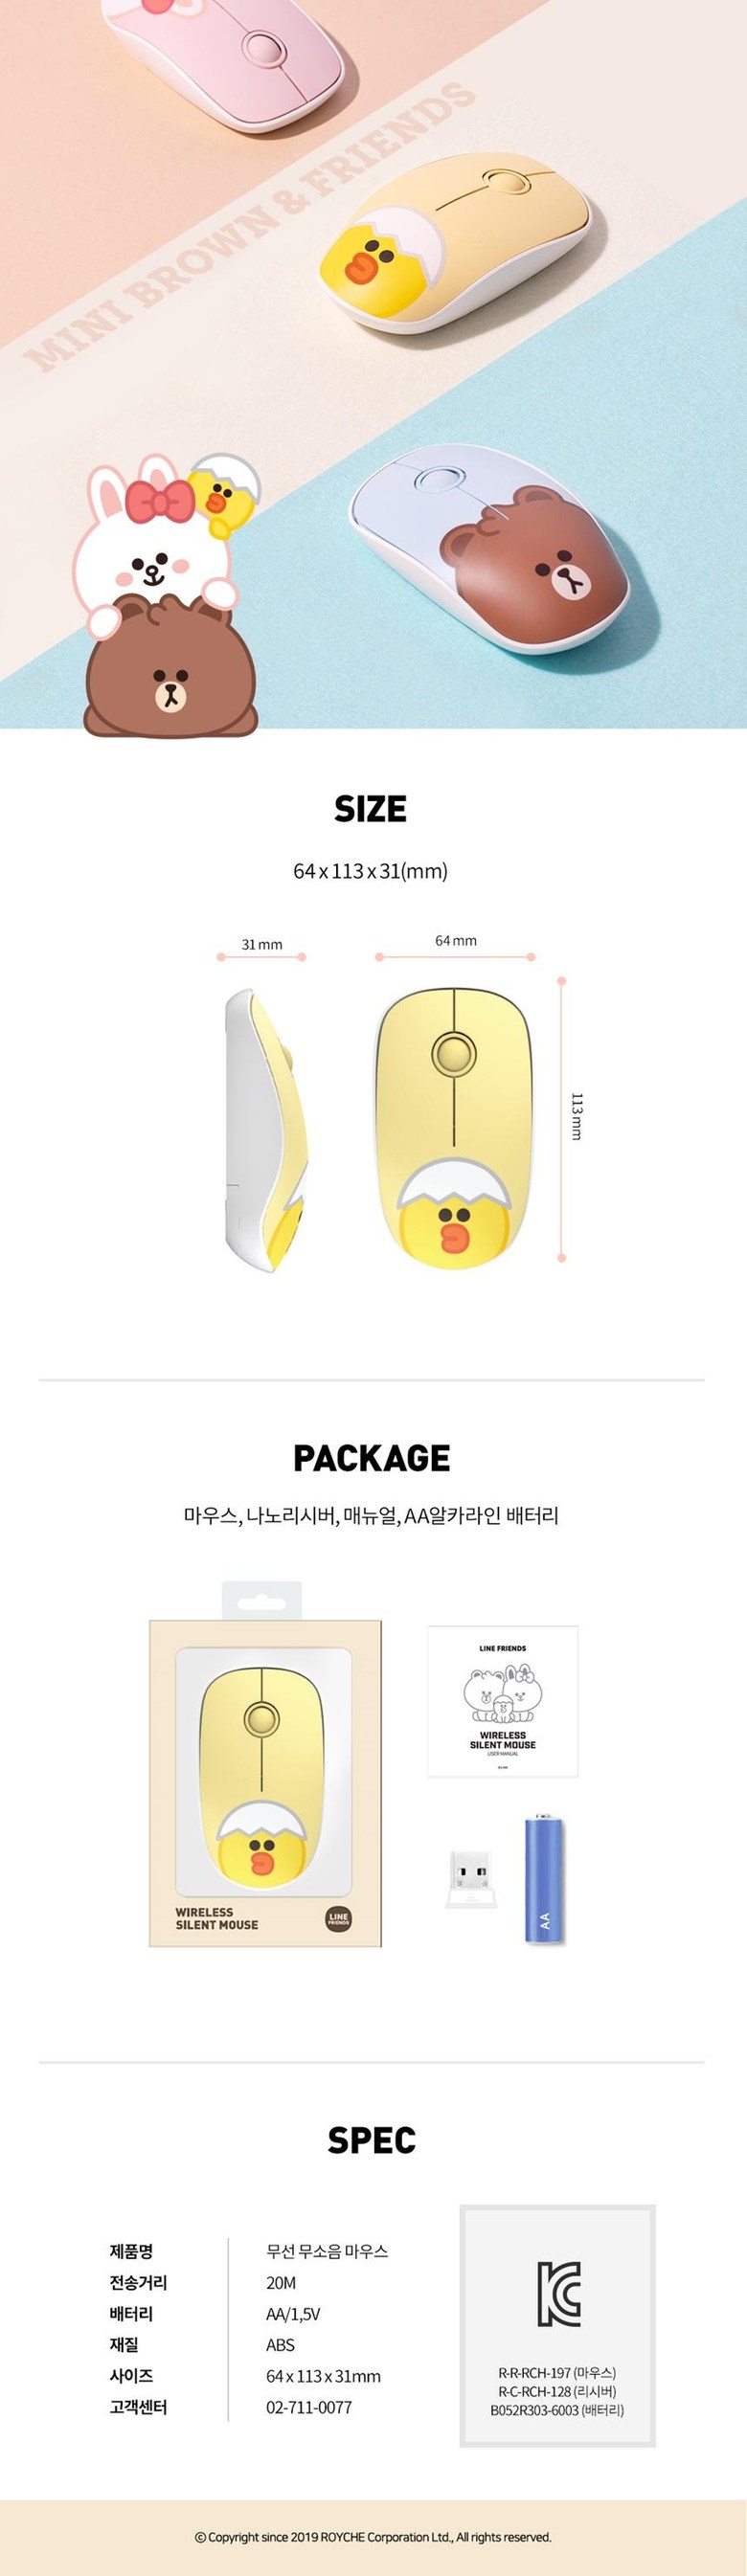 [LINE FRIENDS] Wireless Silent Mouse